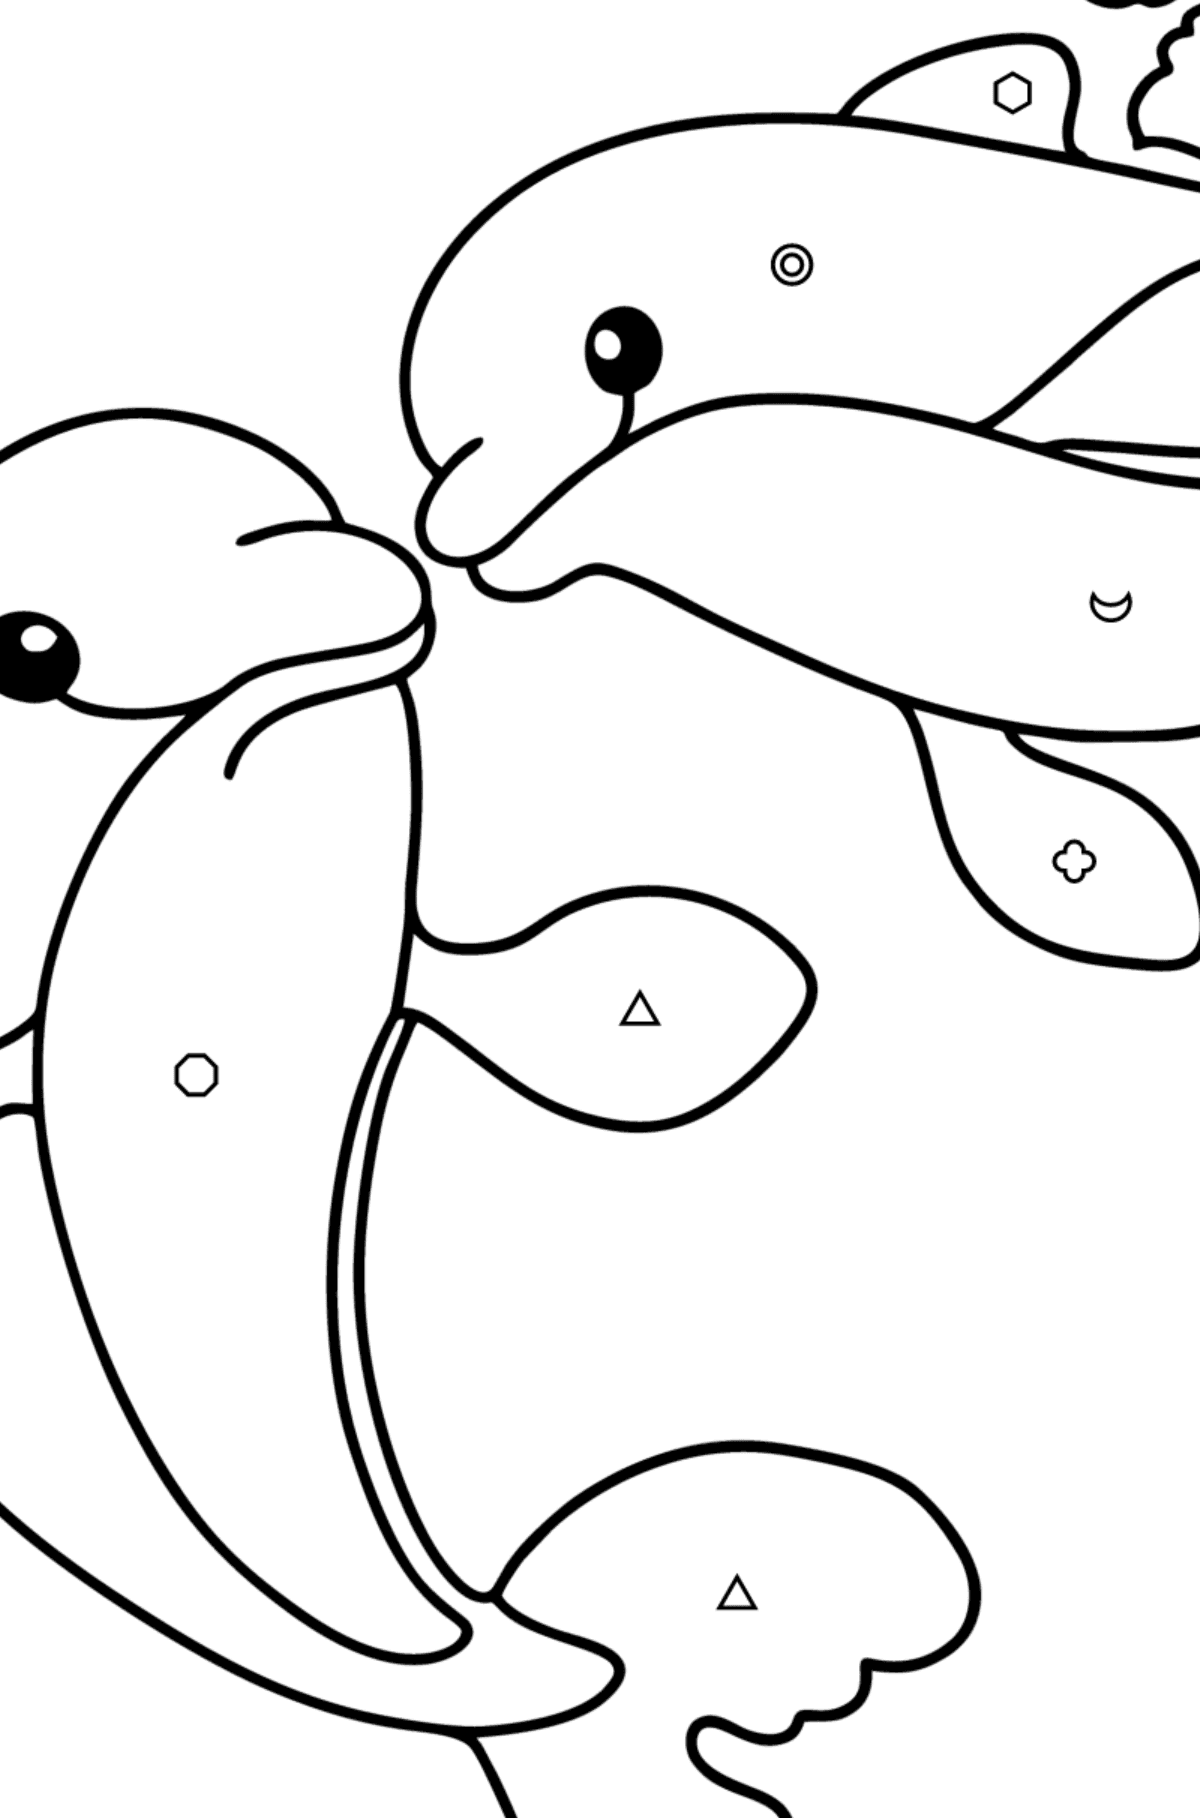 Cute Dolphins coloring page - Coloring by Geometric Shapes for Kids